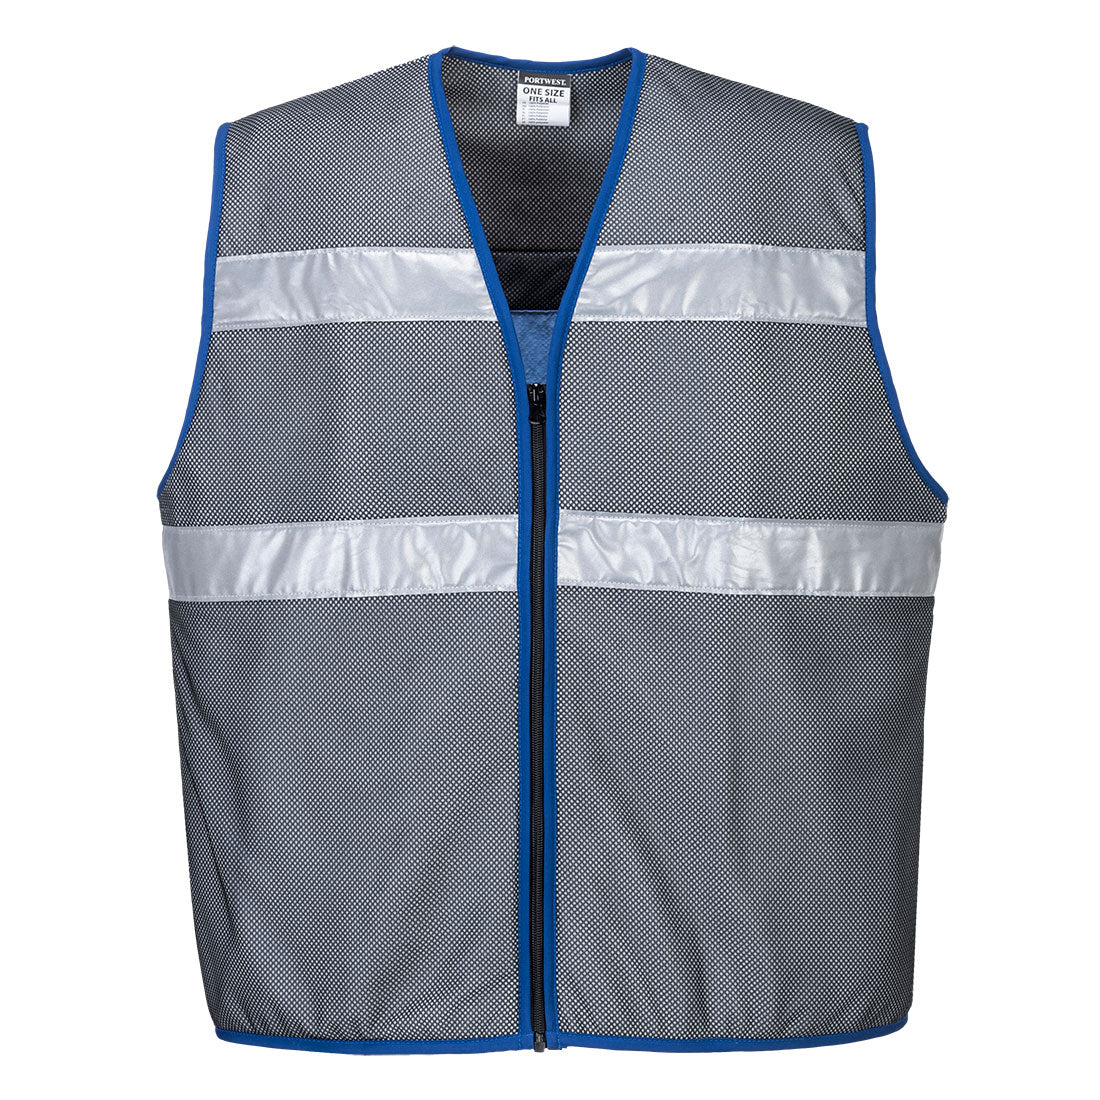 Cooling Vest for Men and Women (One Size, Gray)